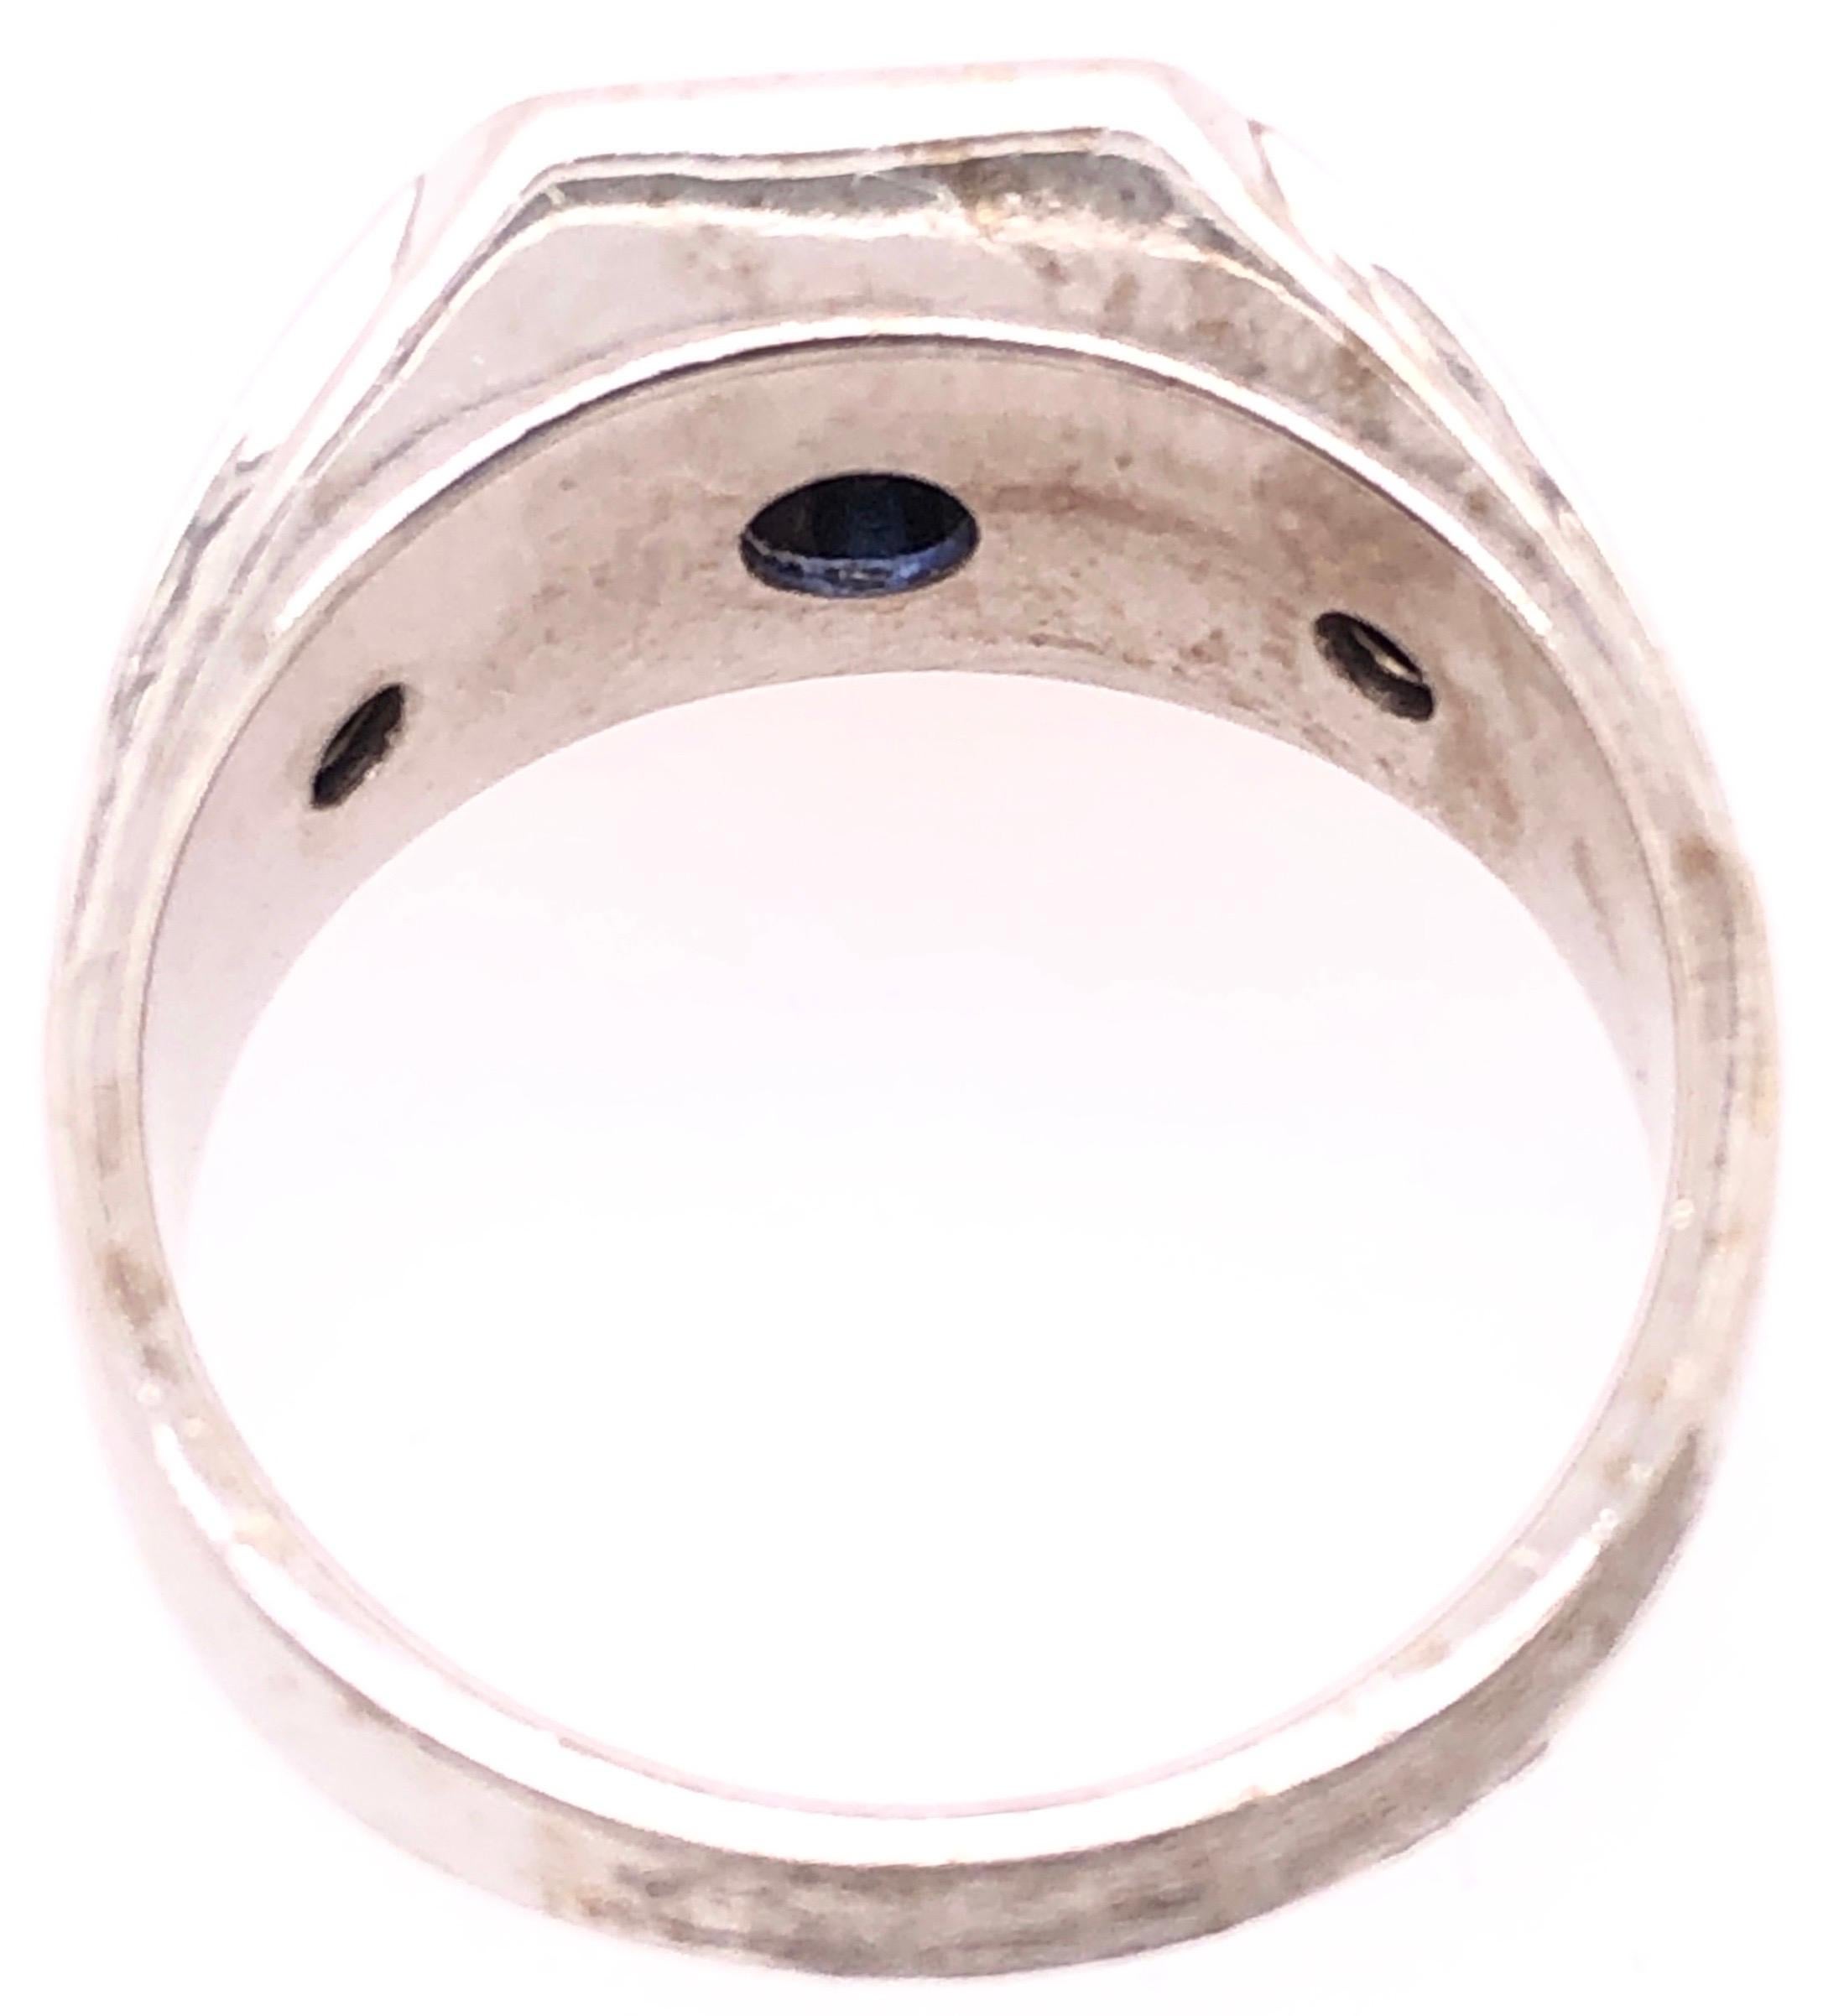 Women's or Men's 14 Karat White Gold Contemporary Sapphire Ring with Diamond Accents